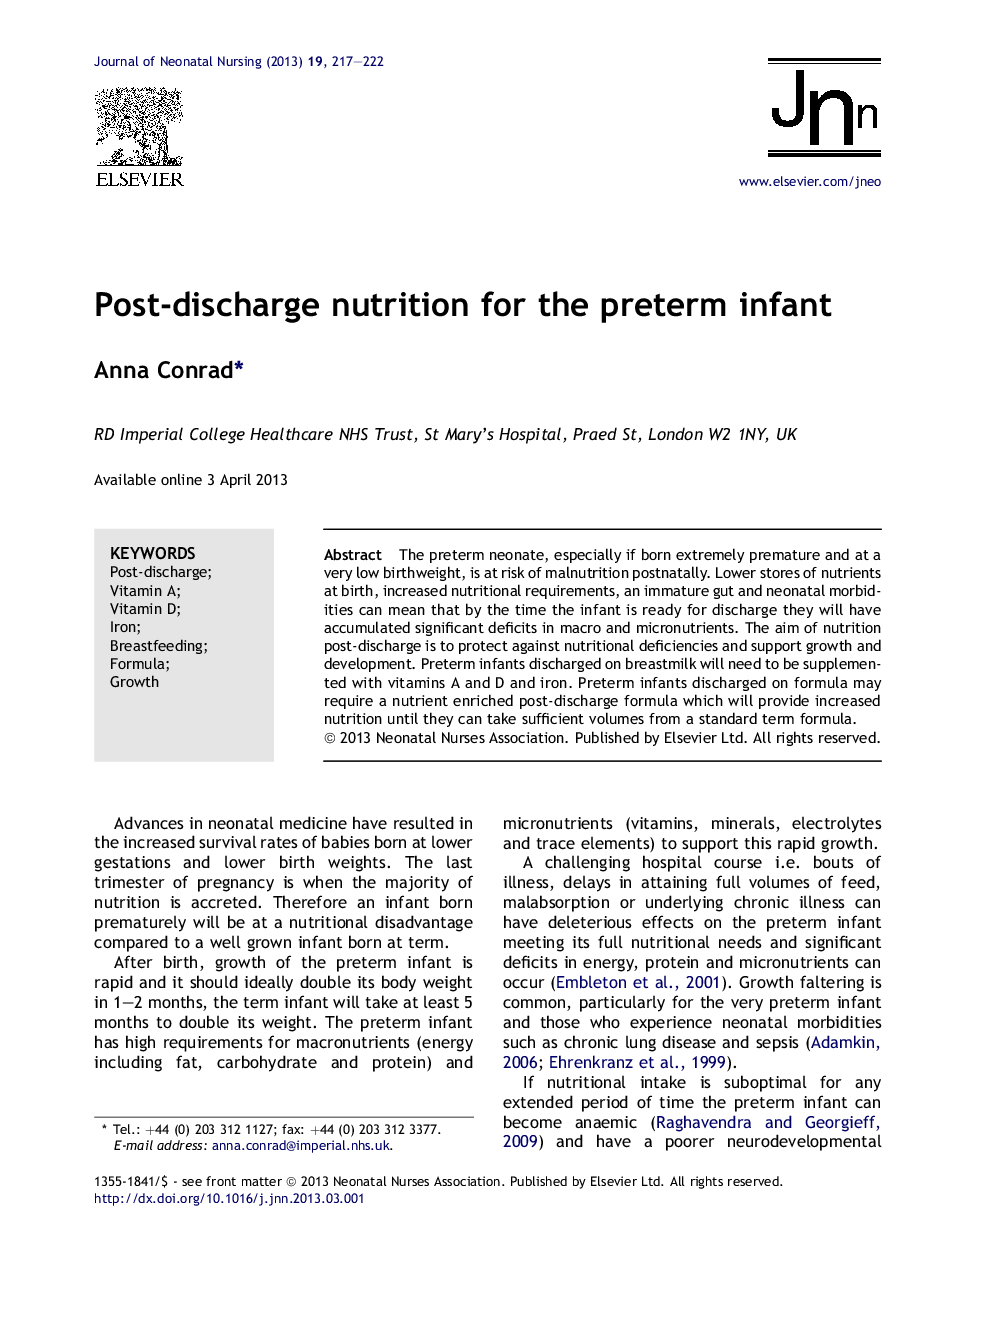 Post-discharge nutrition for the preterm infant